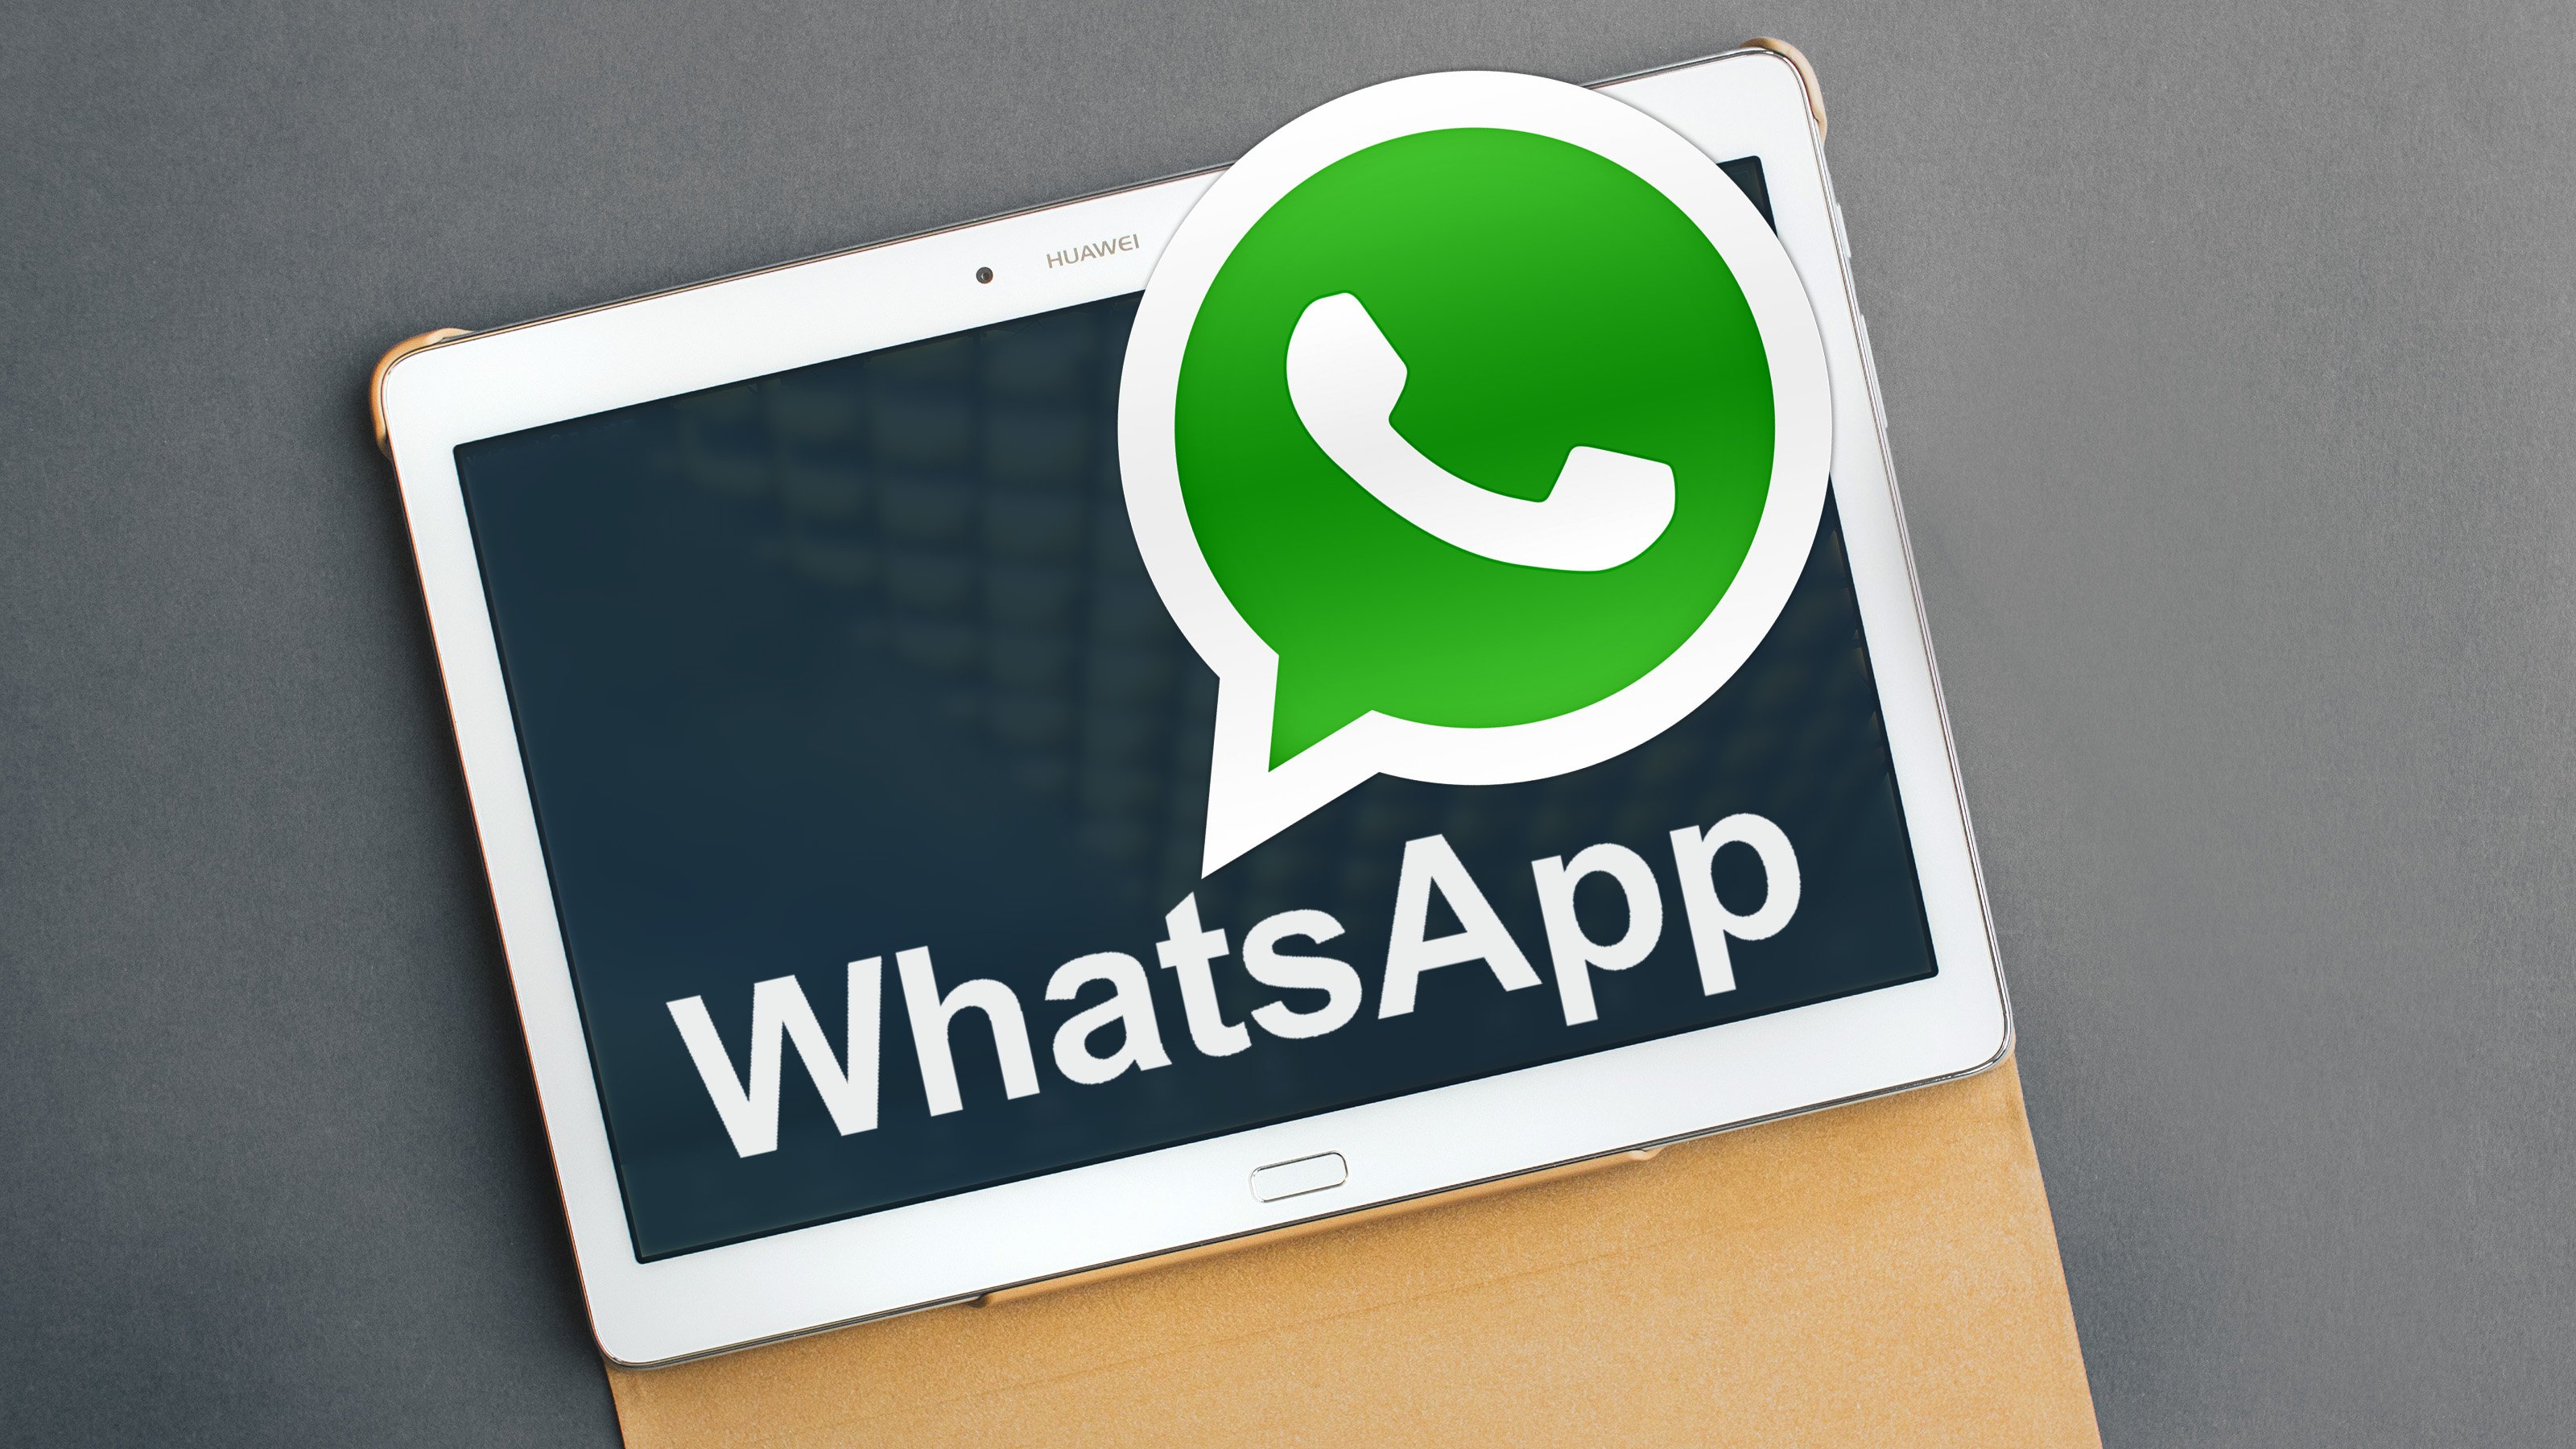 whatsapp web tablet android download